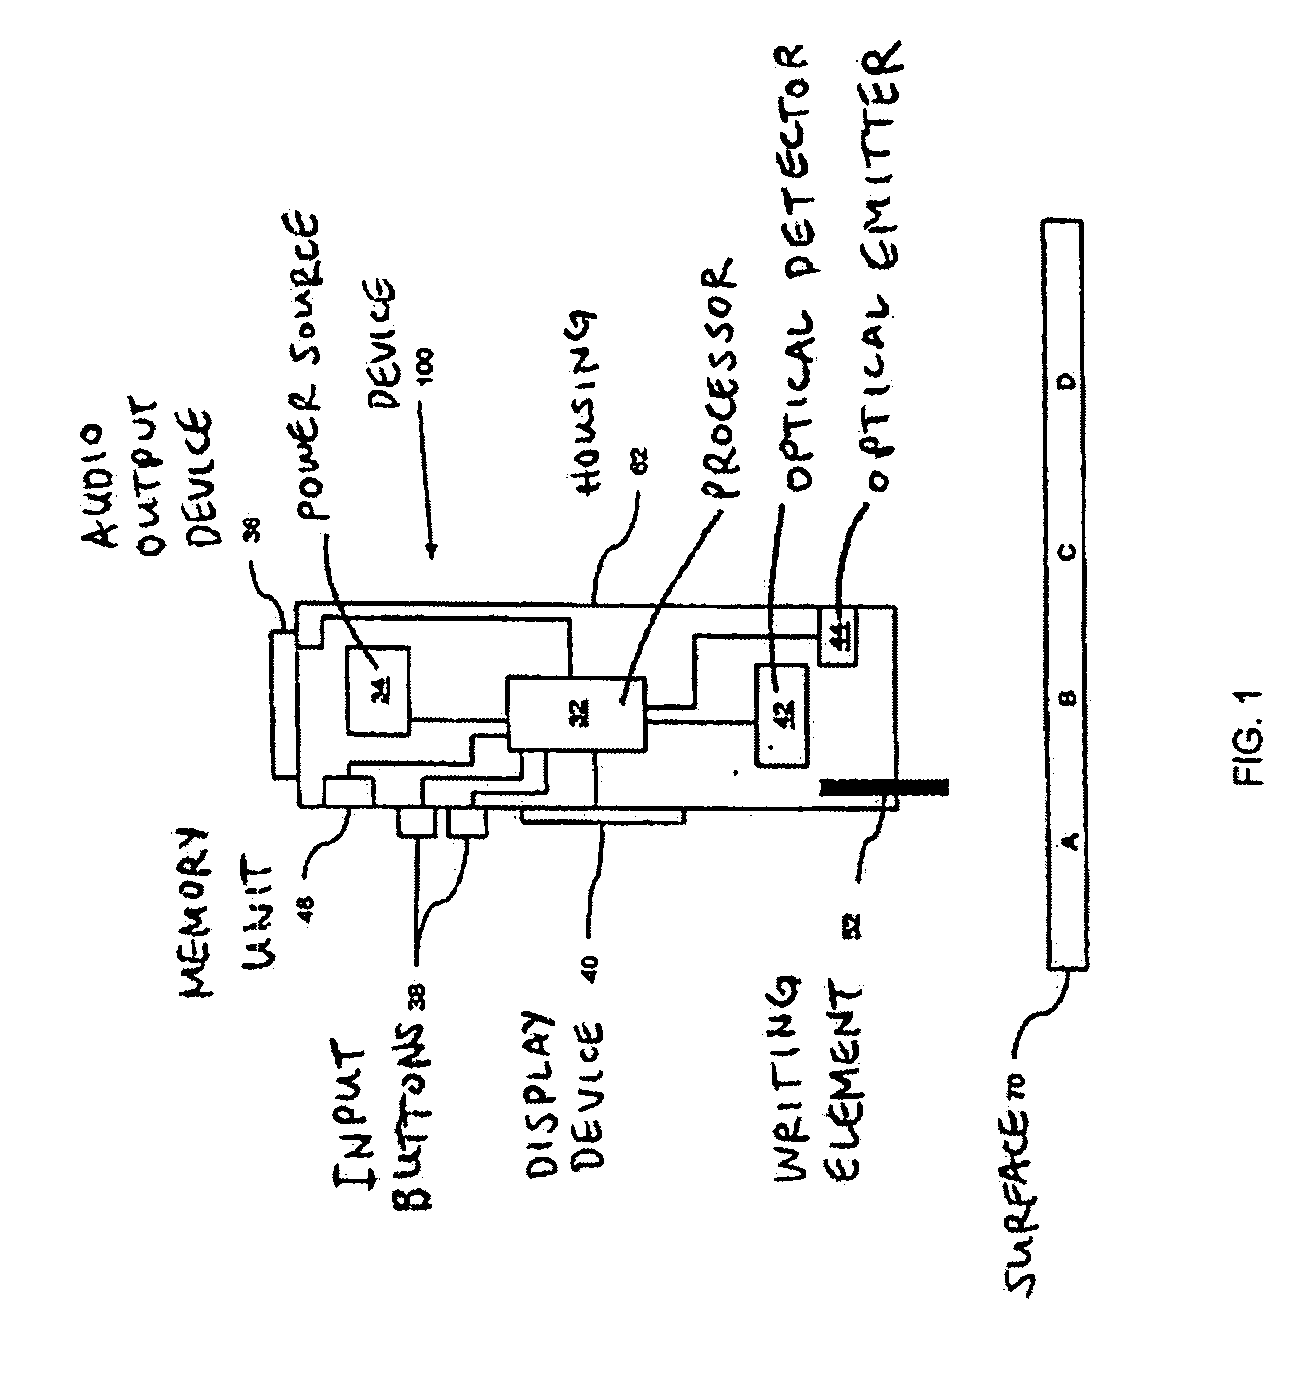 Method and system for implementing a user interface for a device through recognized text and bounded areas